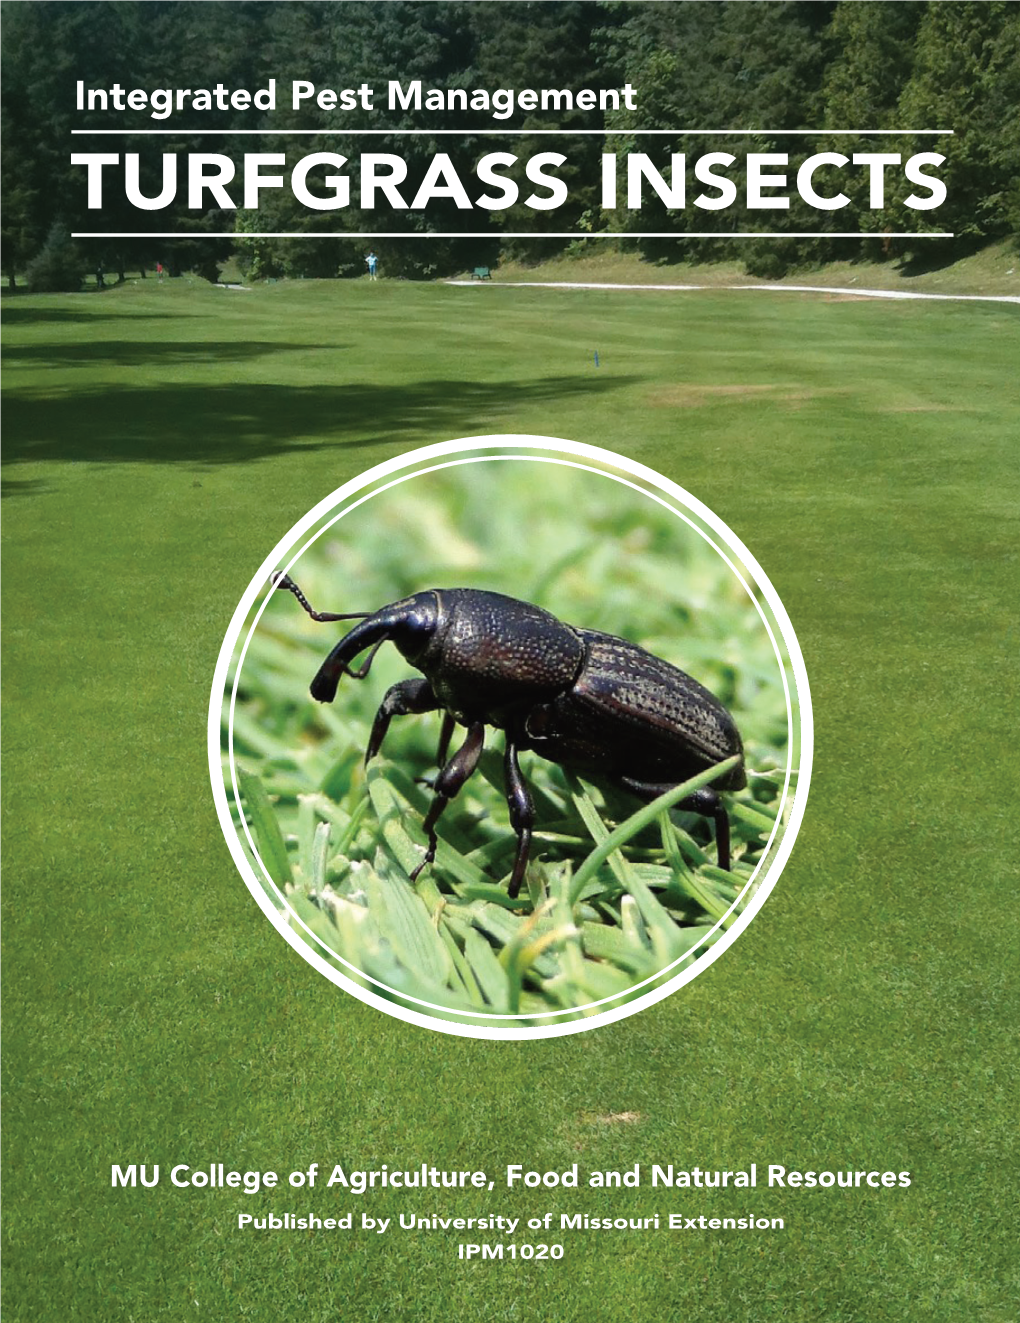 Turfgrass Insects